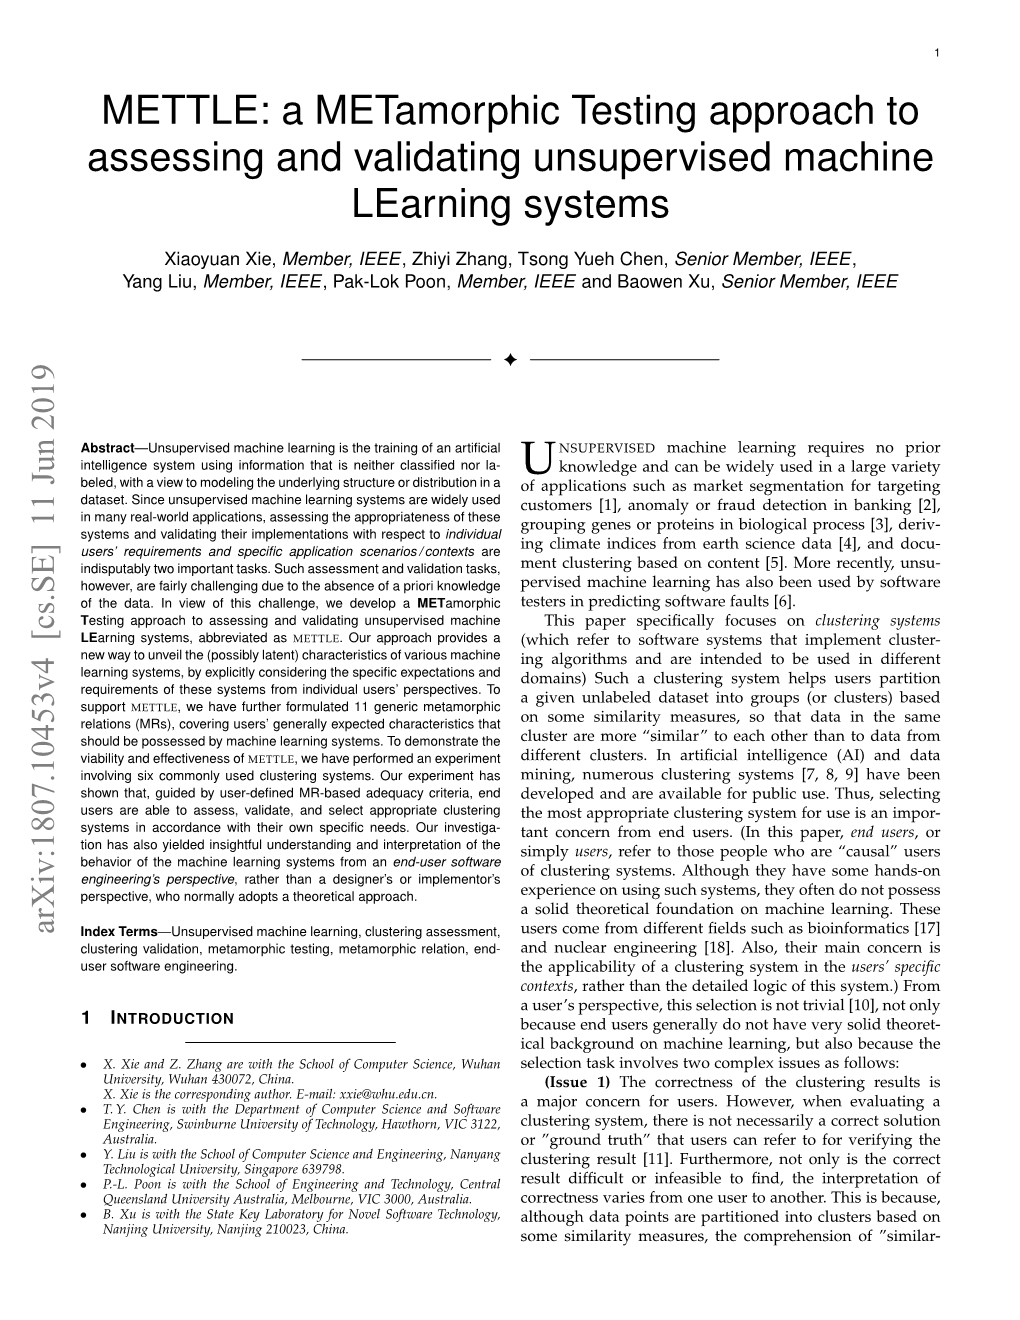 METTLE: a Metamorphic Testing Approach to Assessing and Validating Unsupervised Machine Learning Systems